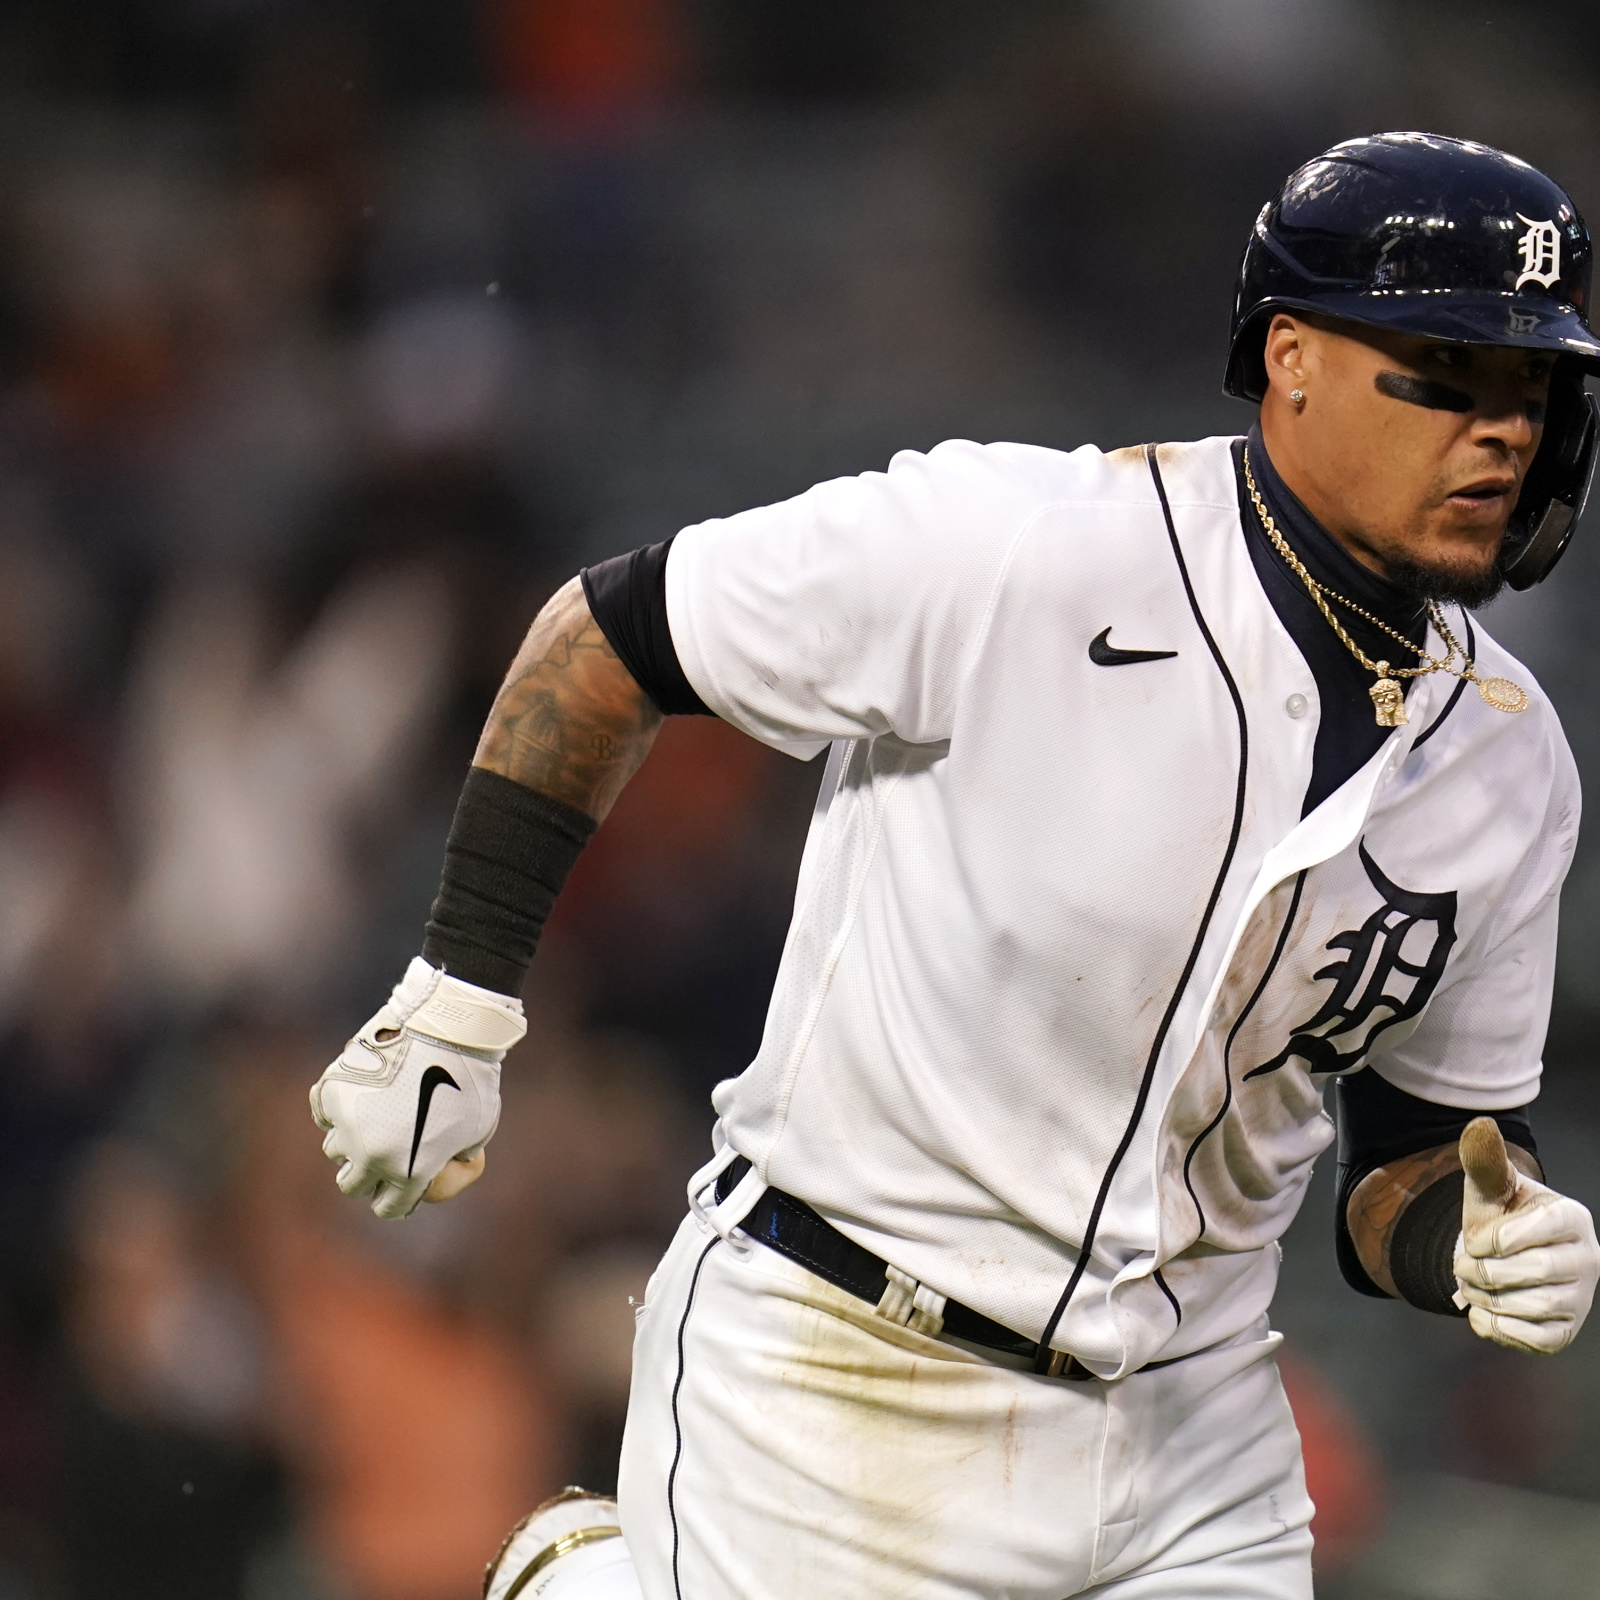 Tigers place Javier Báez on 10-day IL for thumb soreness - Bless